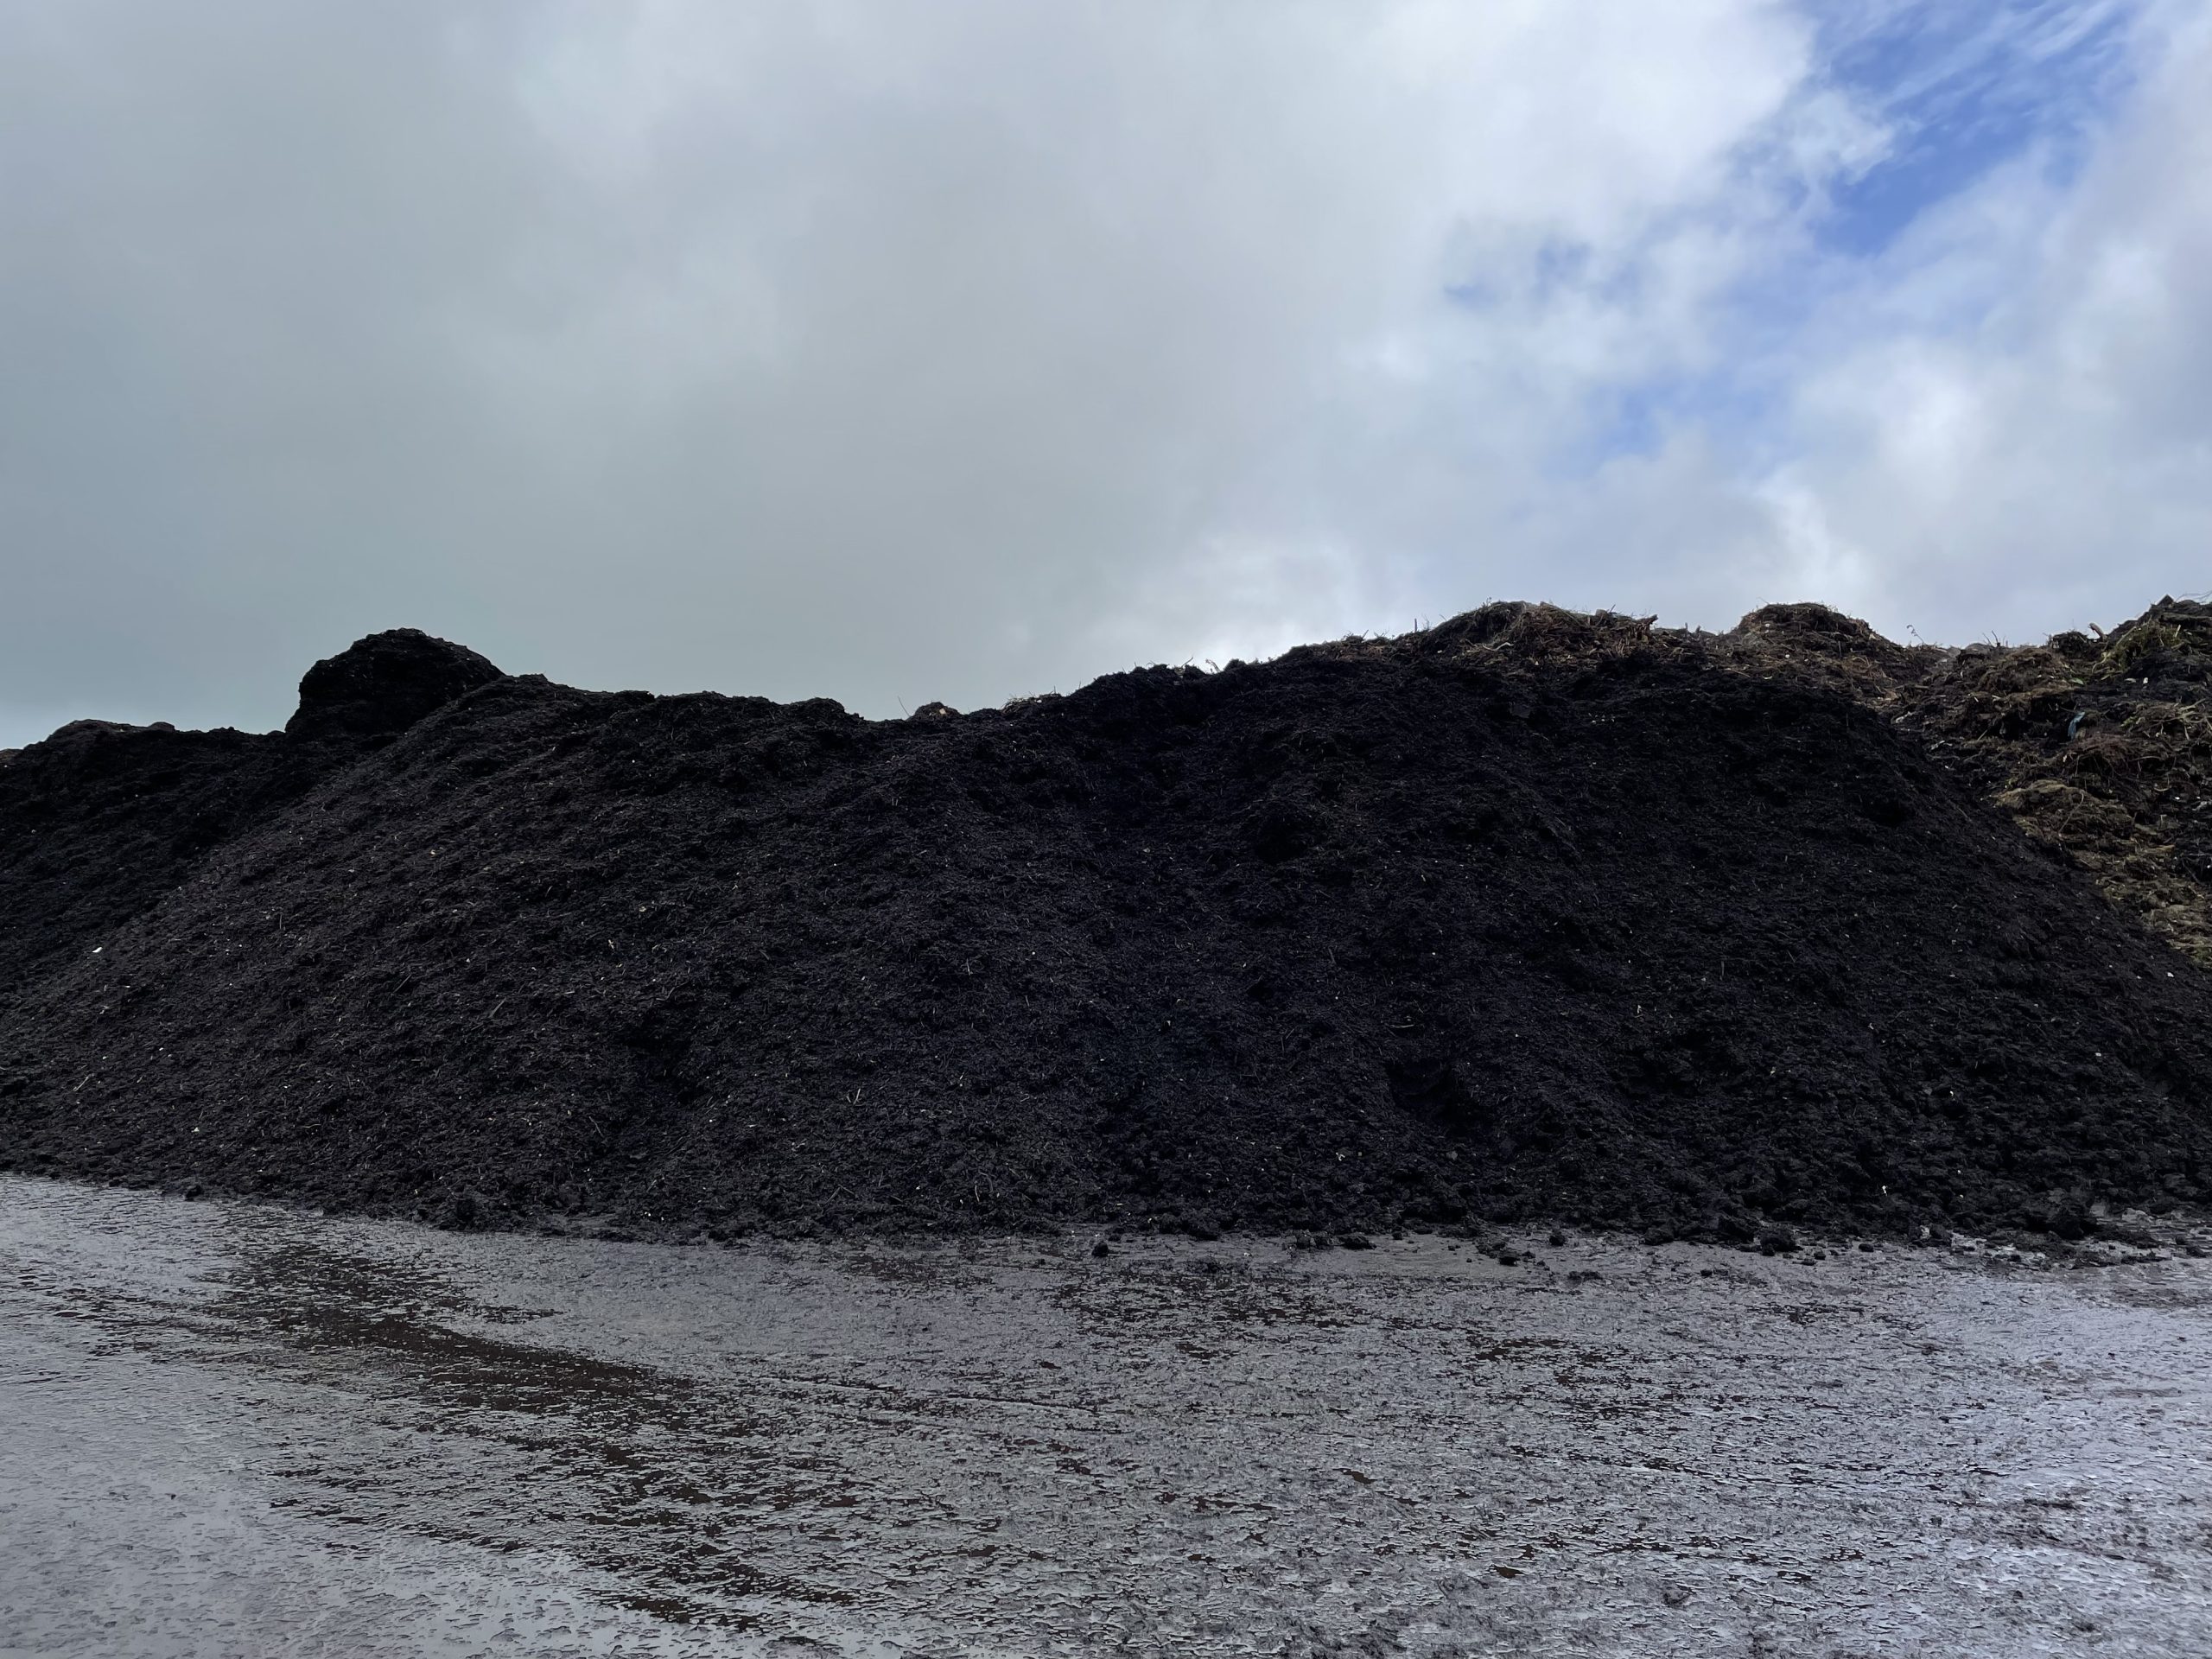 A pile of compost that looks like dark brown earth